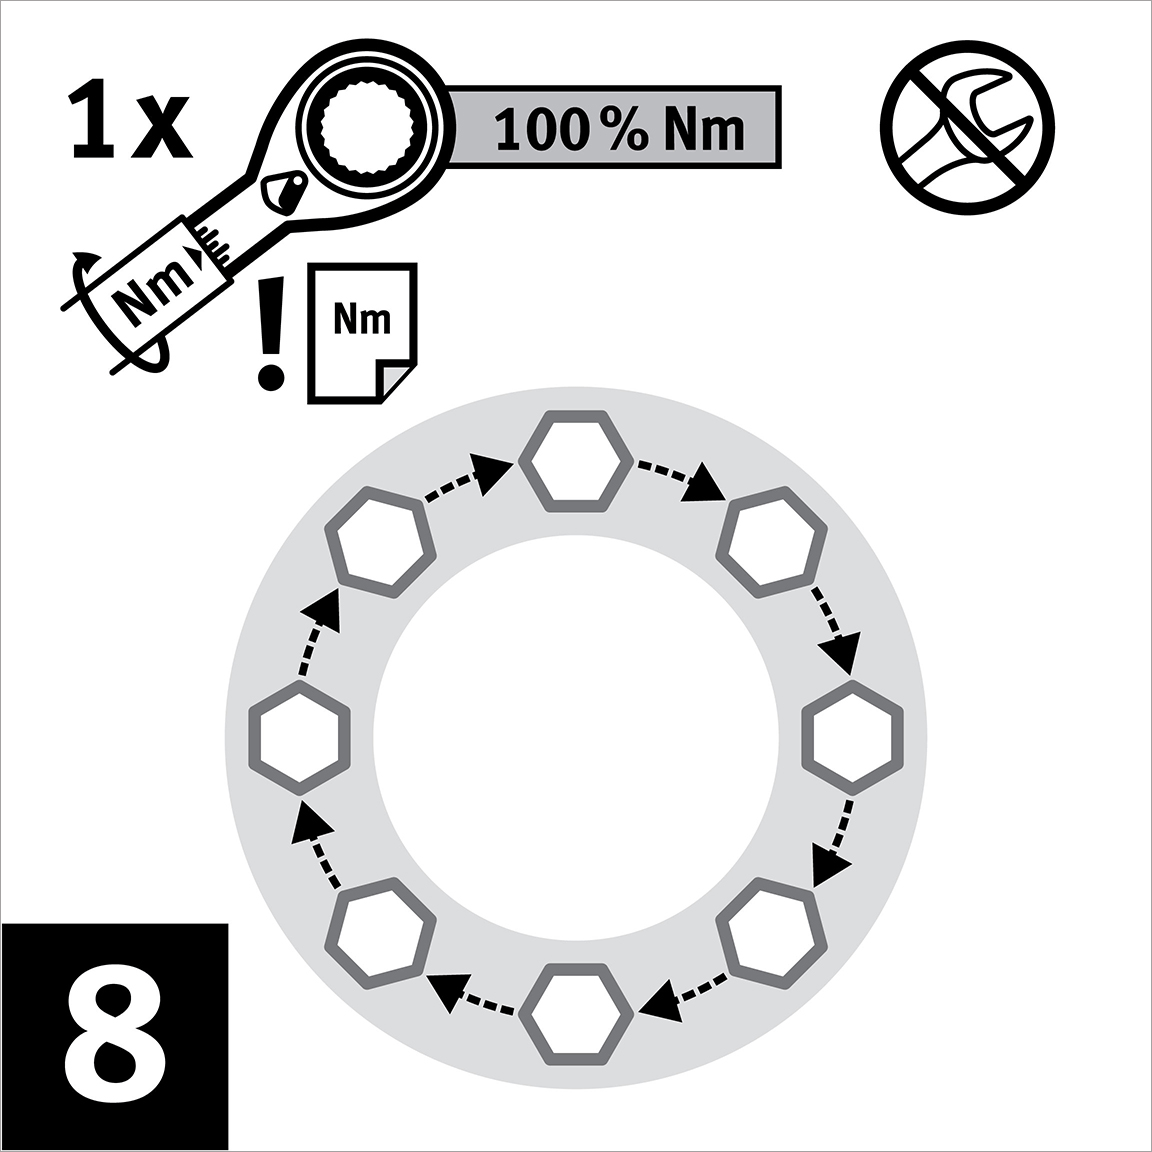 Complete the installation by performing circular passes until all bolts have acheived the target torque.